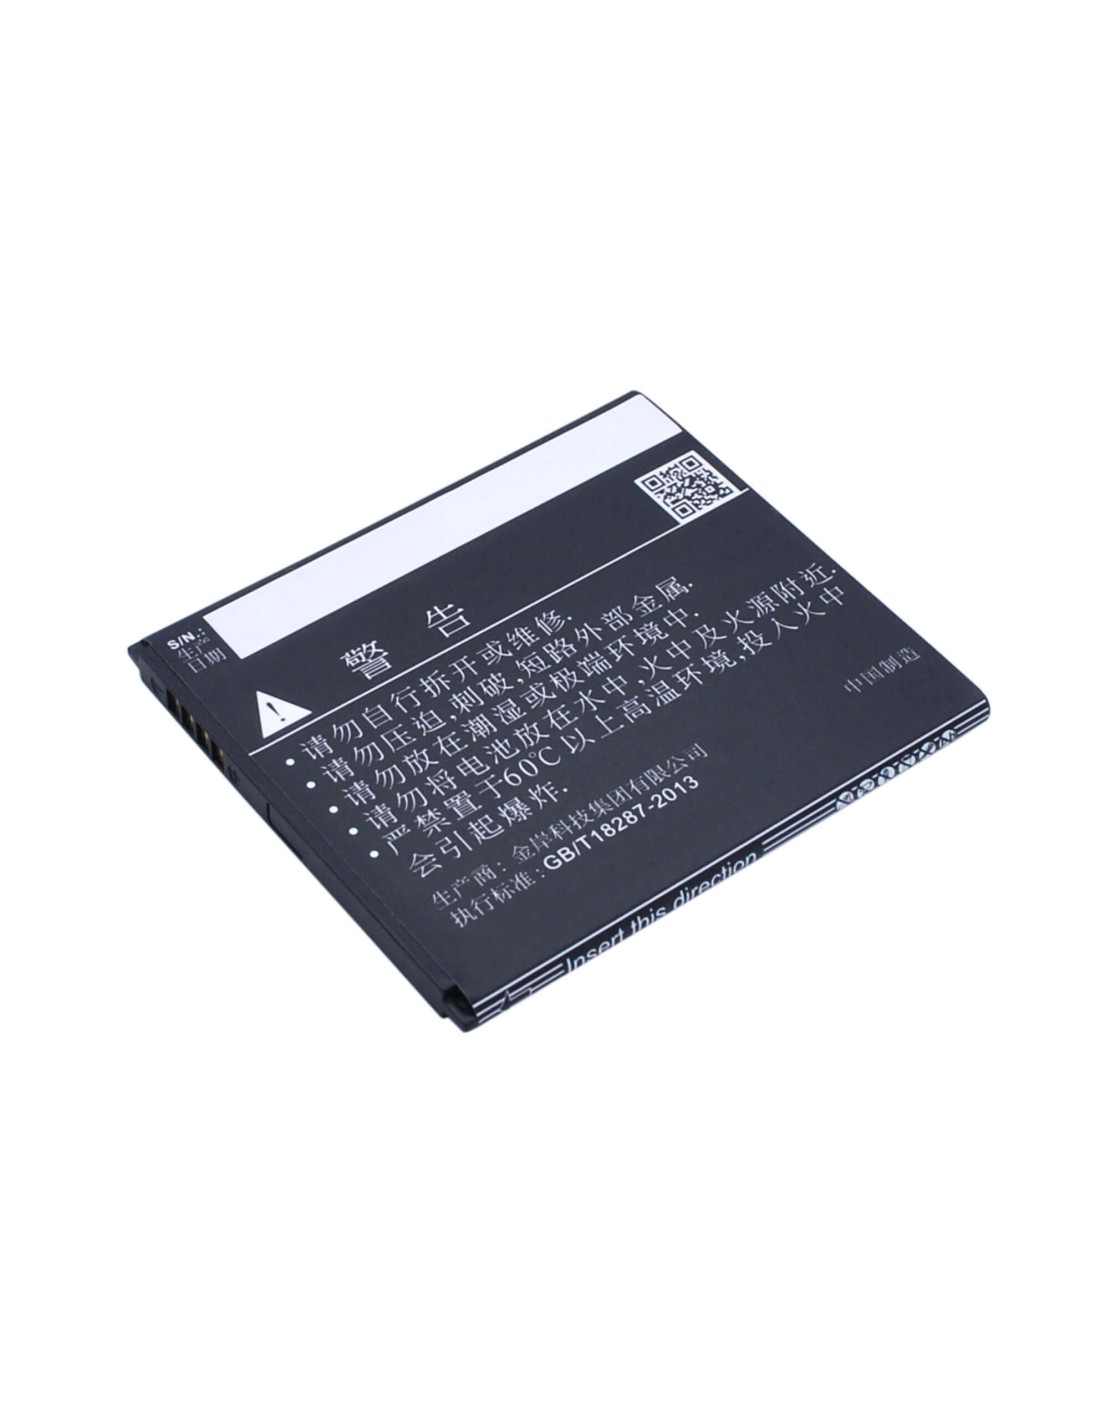 Battery for Coolpad Y70-C, Y60-C1, Y80-C 3.7V, 1800mAh - 6.66Wh